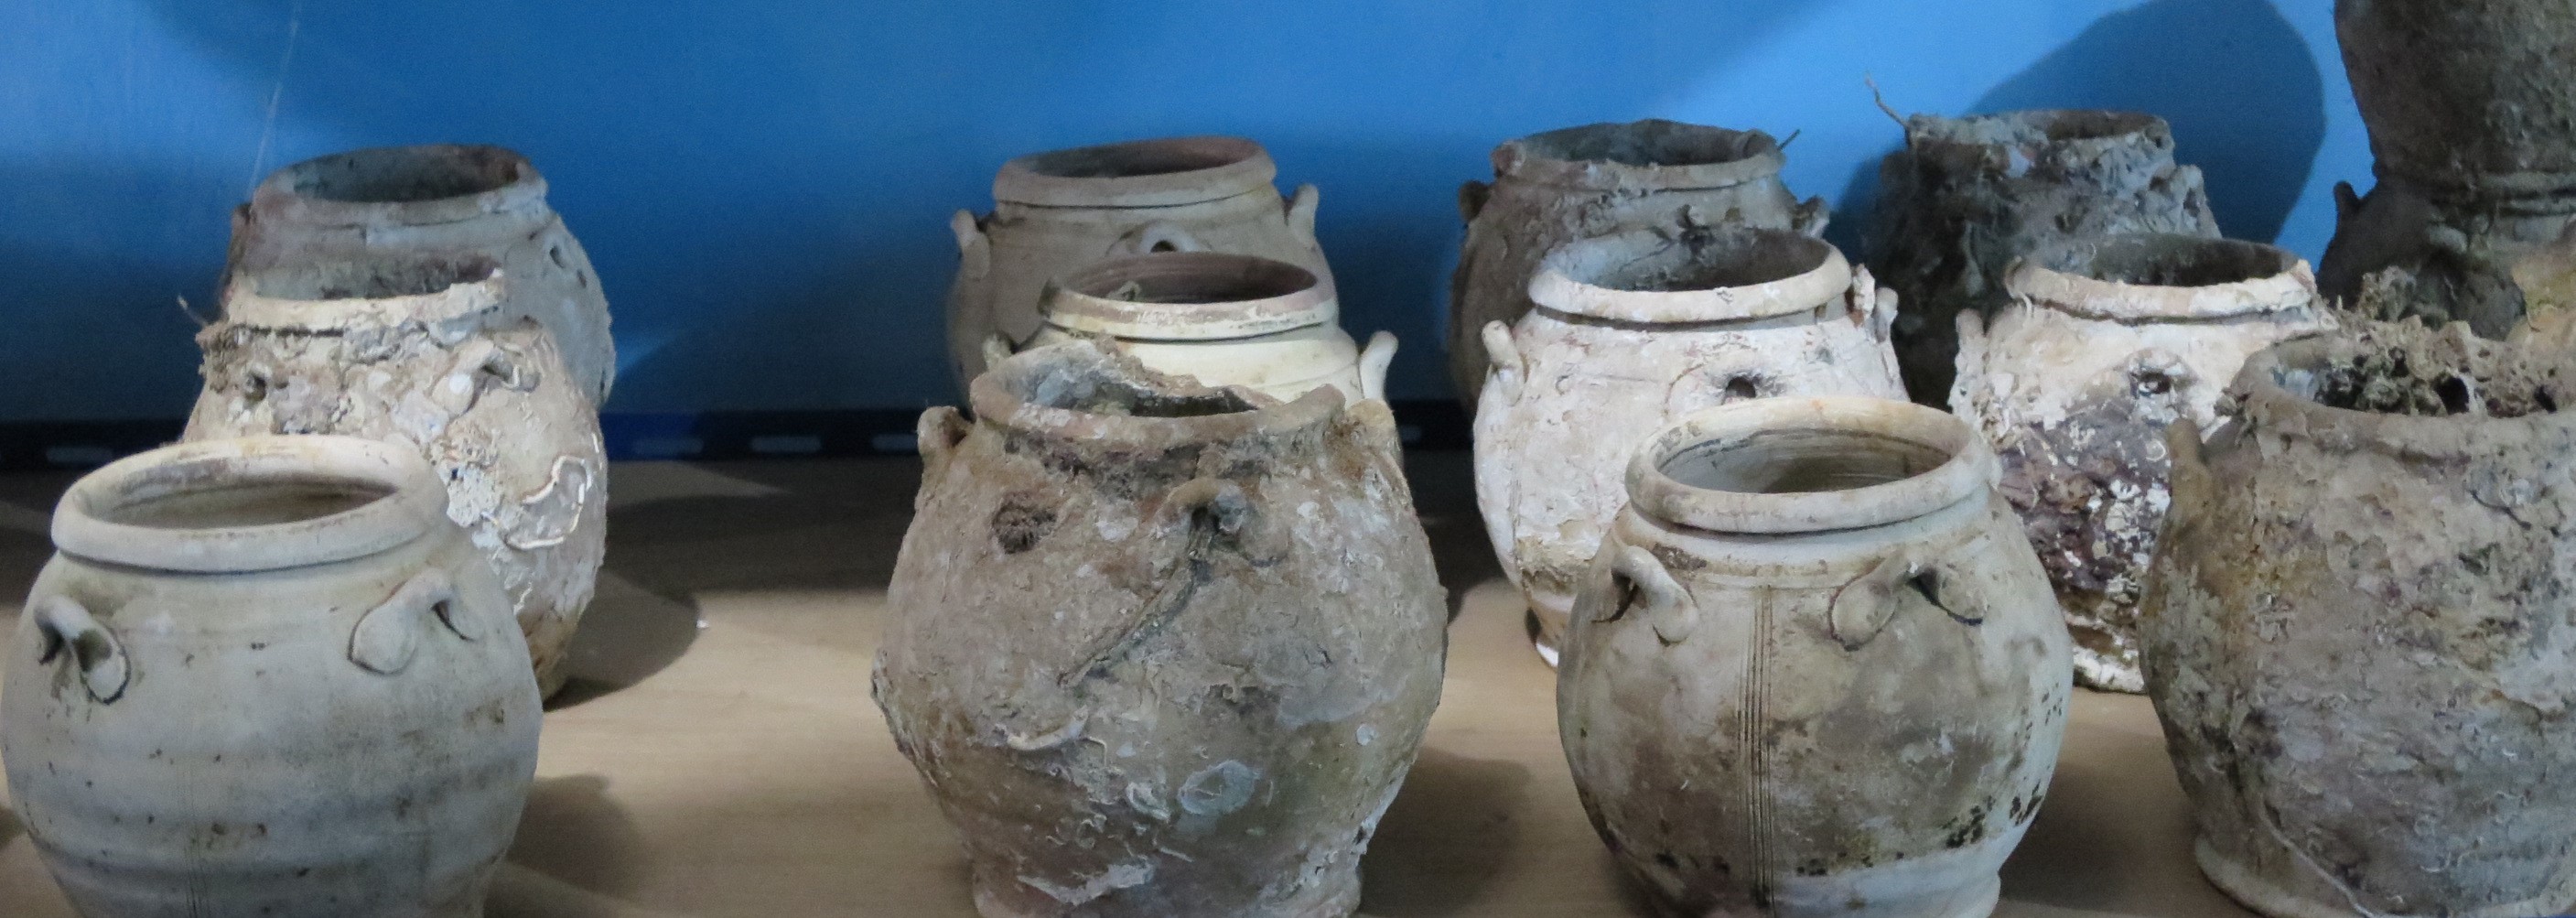 Medium wide-mouth jars with four lug-handles, a folded mouth-rim and a flat base. Some are decorated with triplets of vertical incised lines.